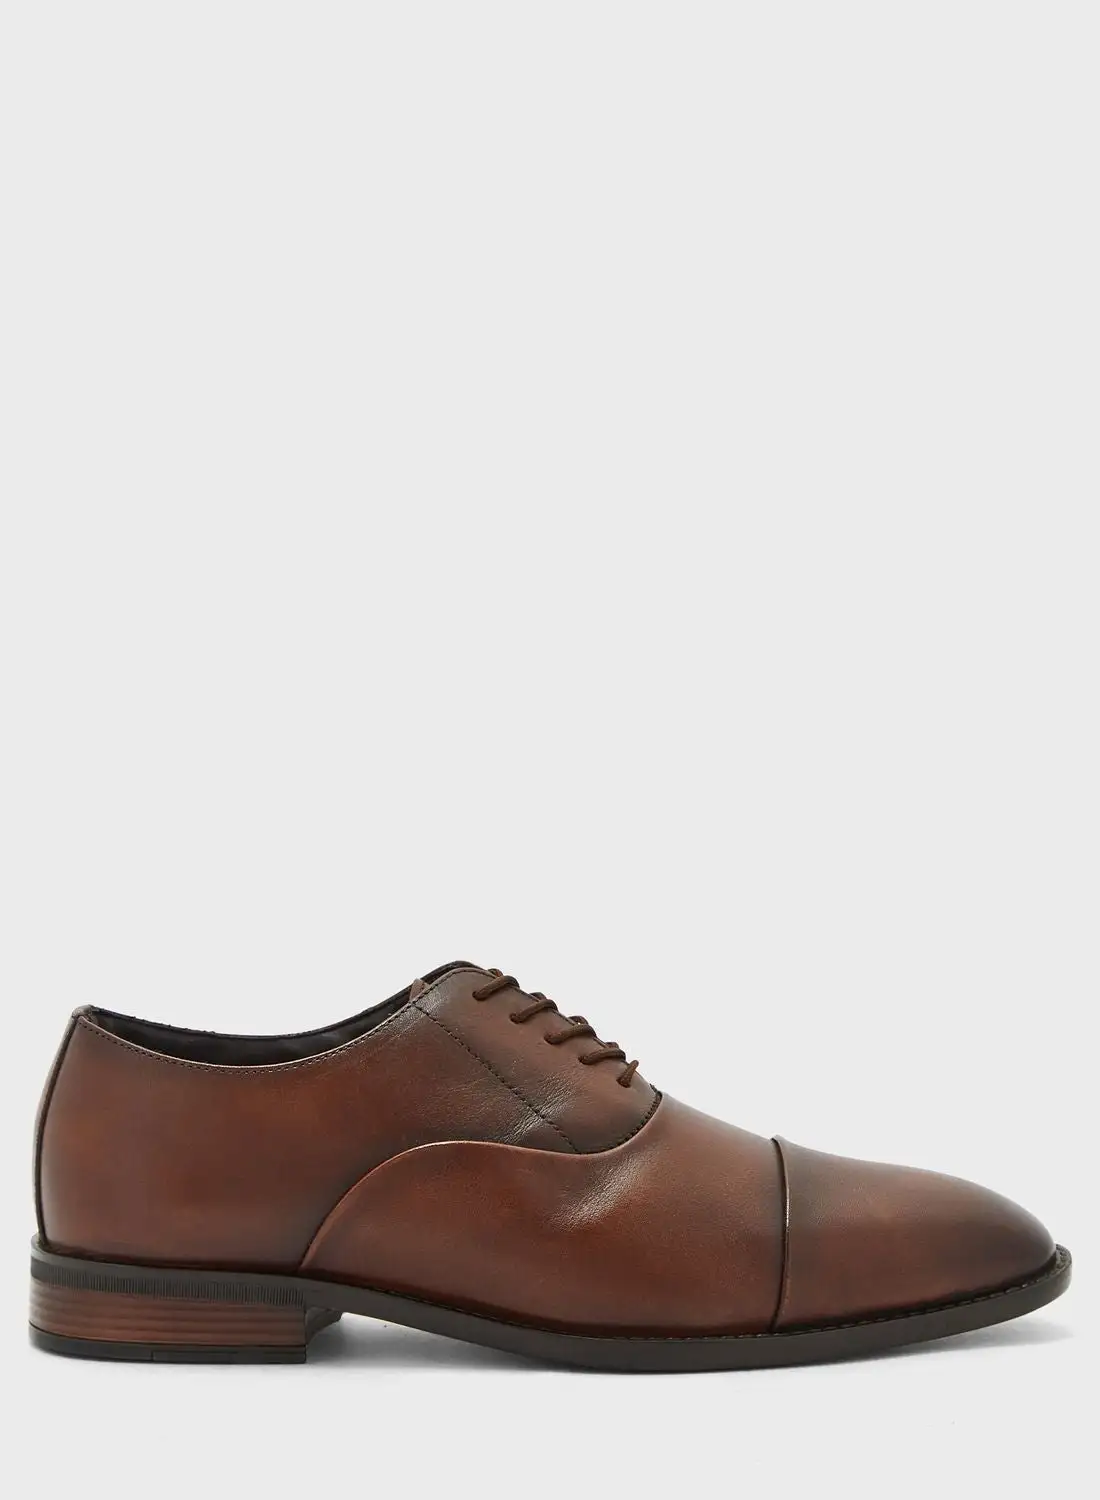 Robert Wood Genuine Leather Hand Finish Oxford Lace Ups